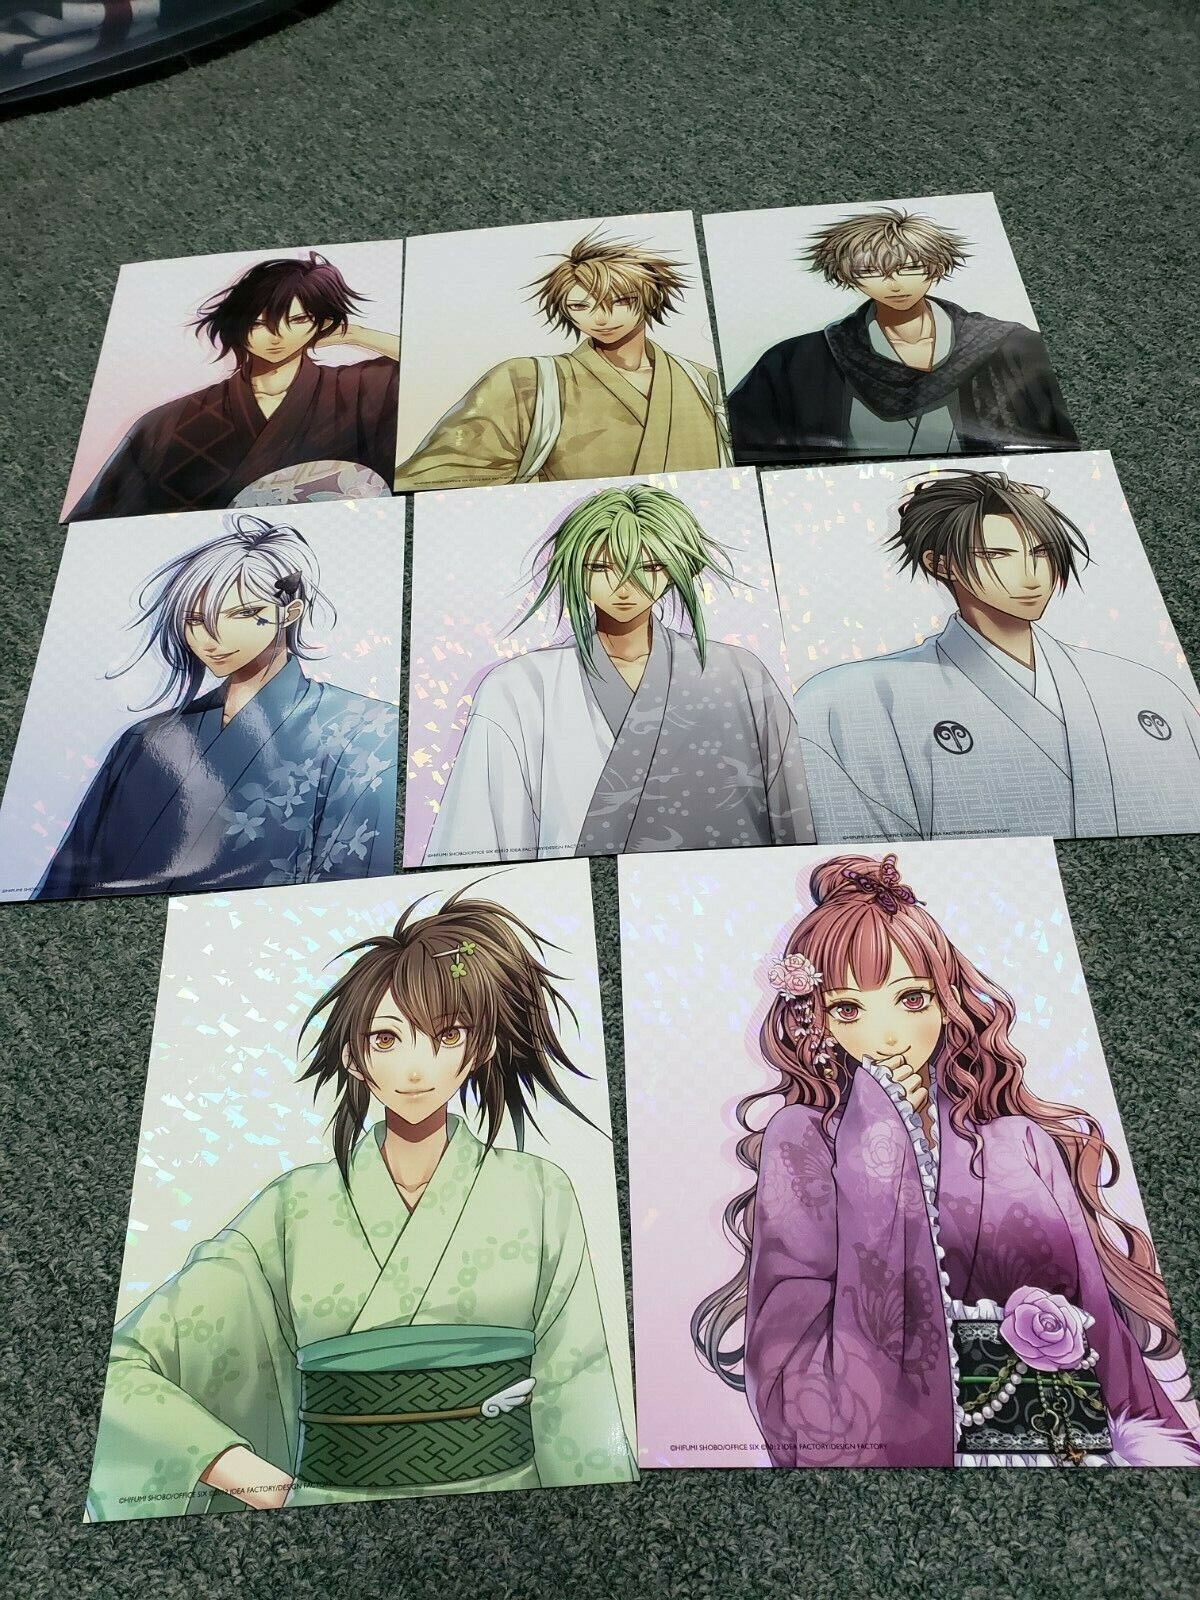 Amnesia Later- Otomate Still Collection vol 9- Art Prints- Set of 8